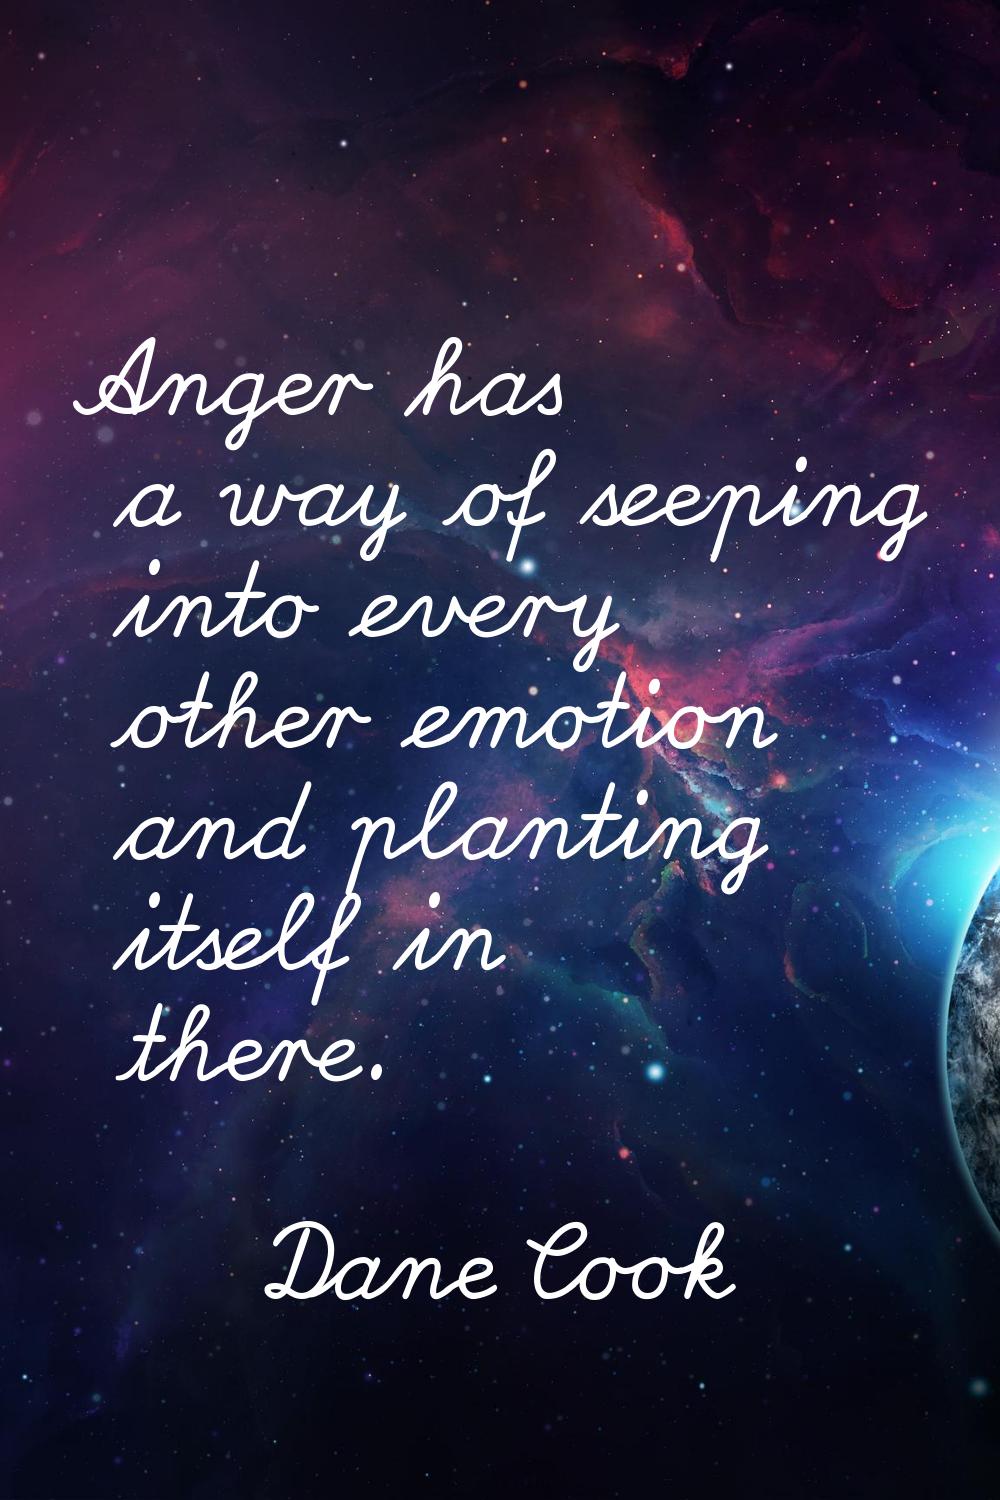 Anger has a way of seeping into every other emotion and planting itself in there.